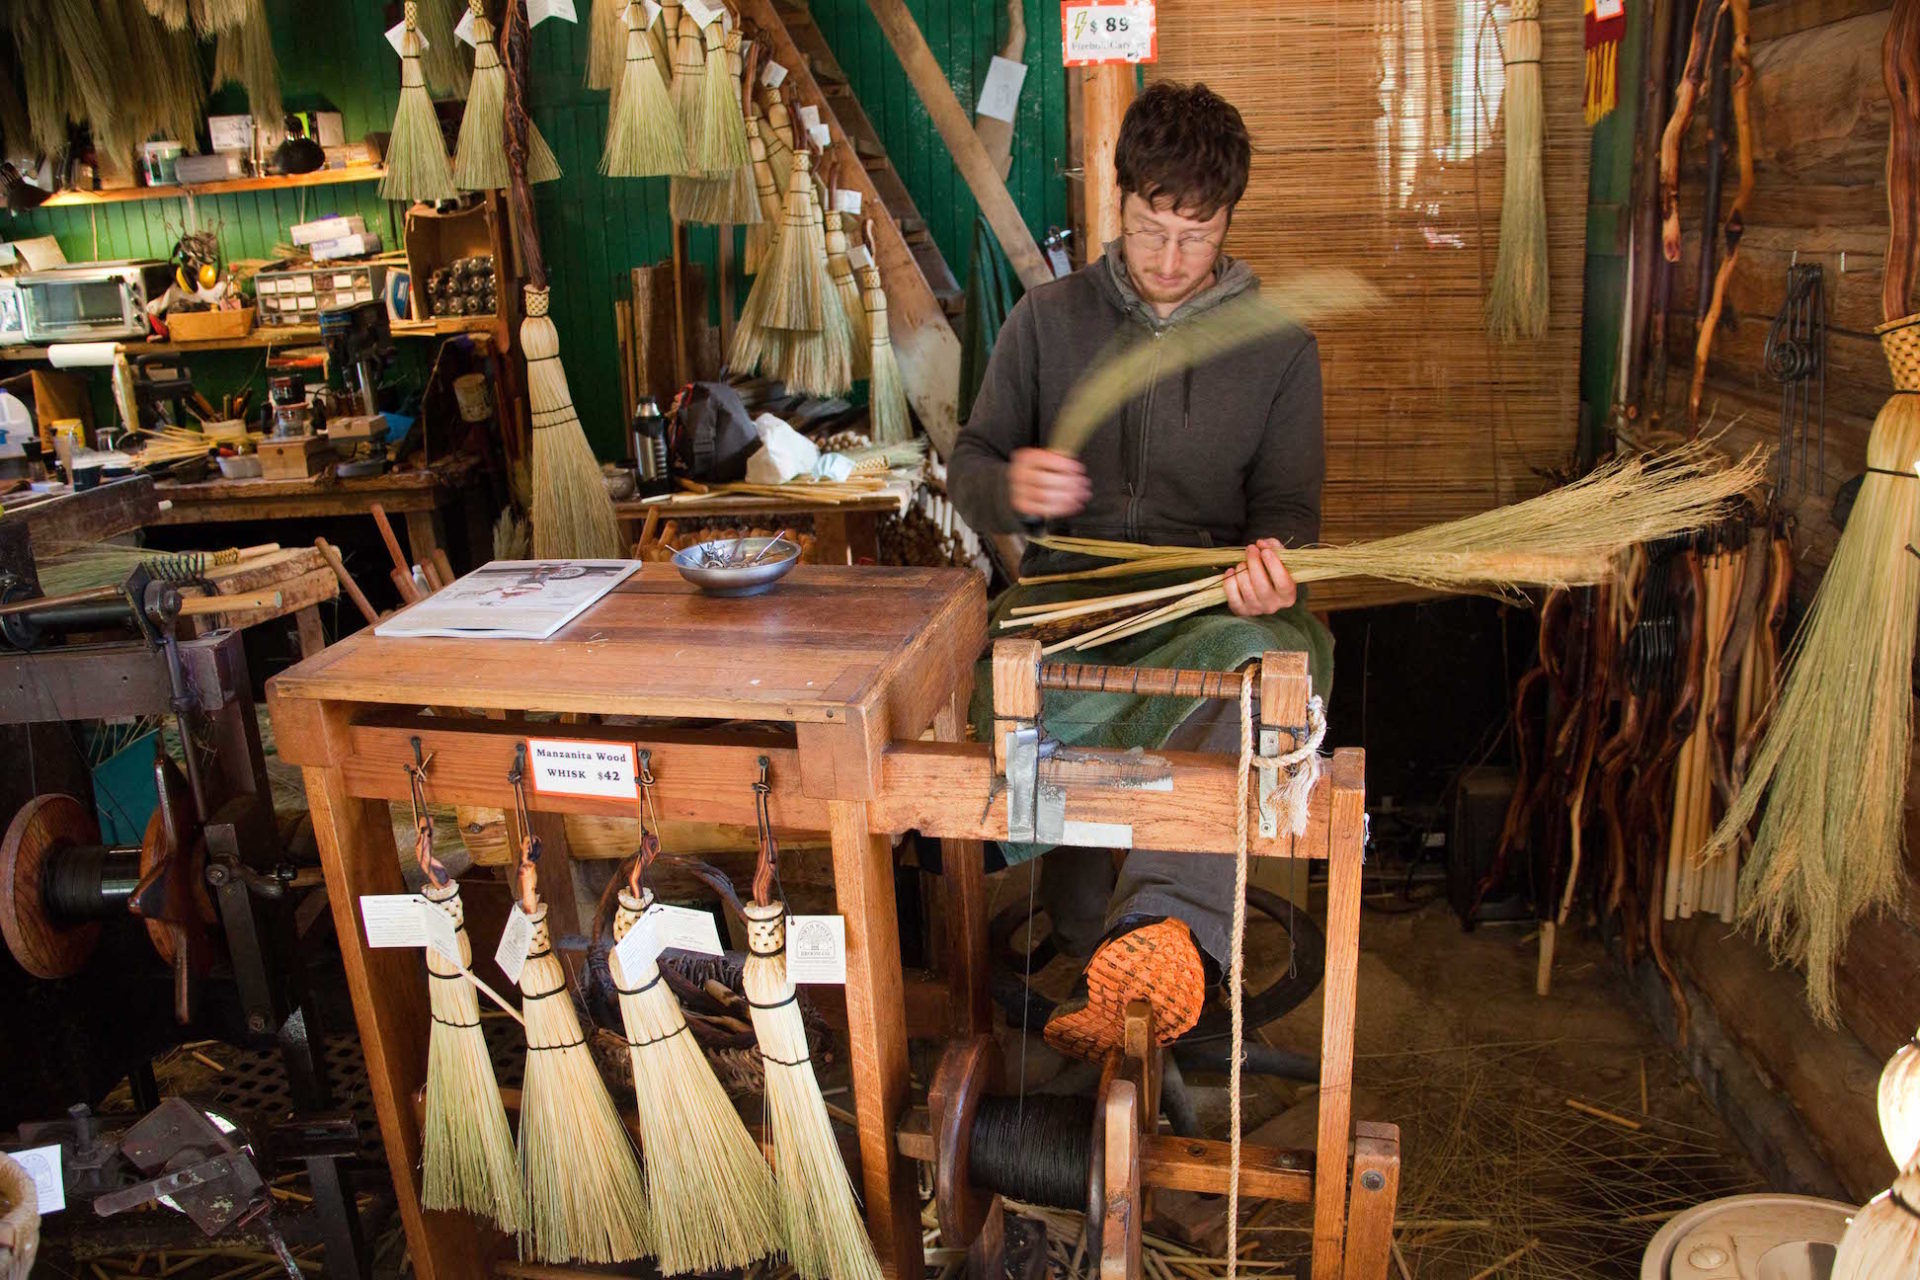 Luke Lewis, owner of the North Woven Broom Co. Photo by Peter Moynes.